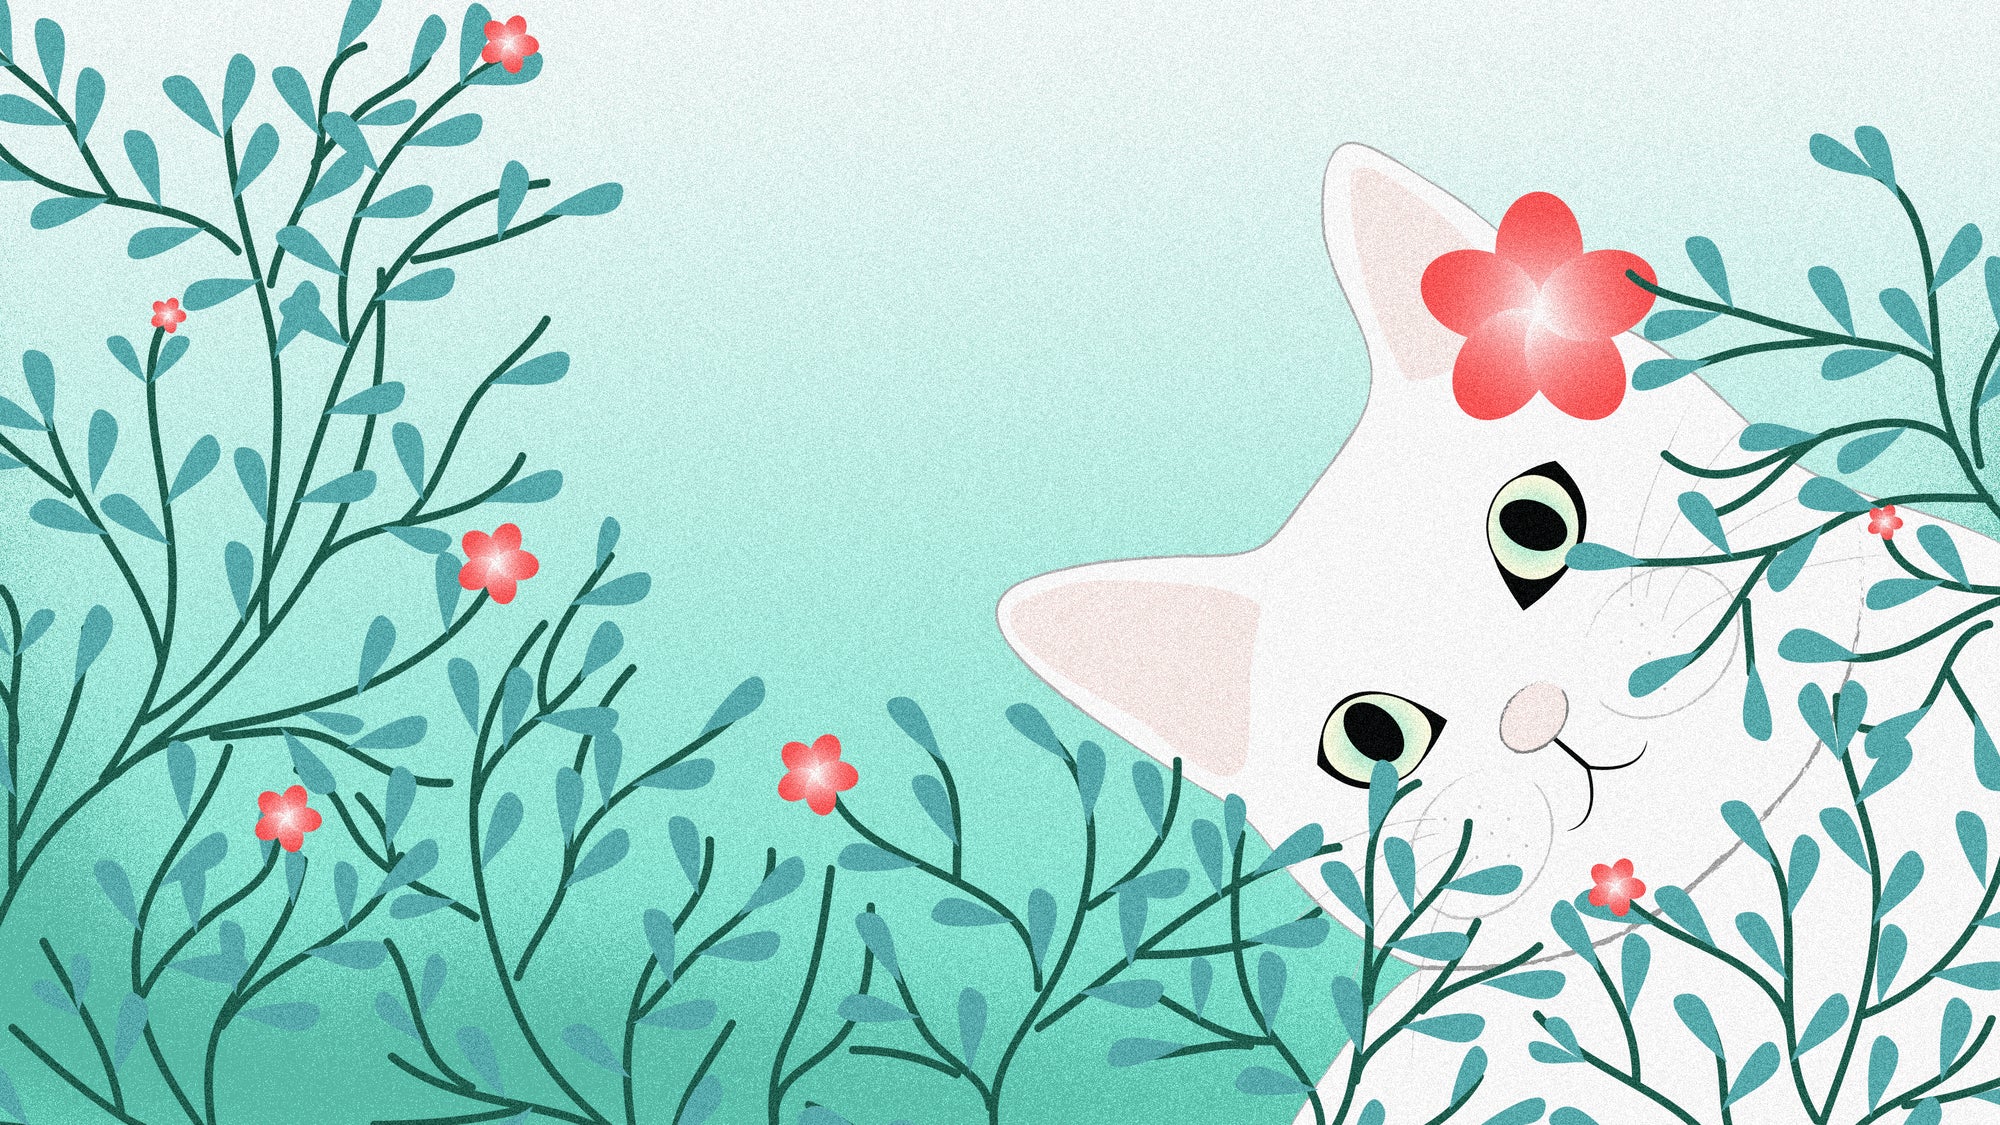 Beautiful white cat hiding behind pinkish-red flowers